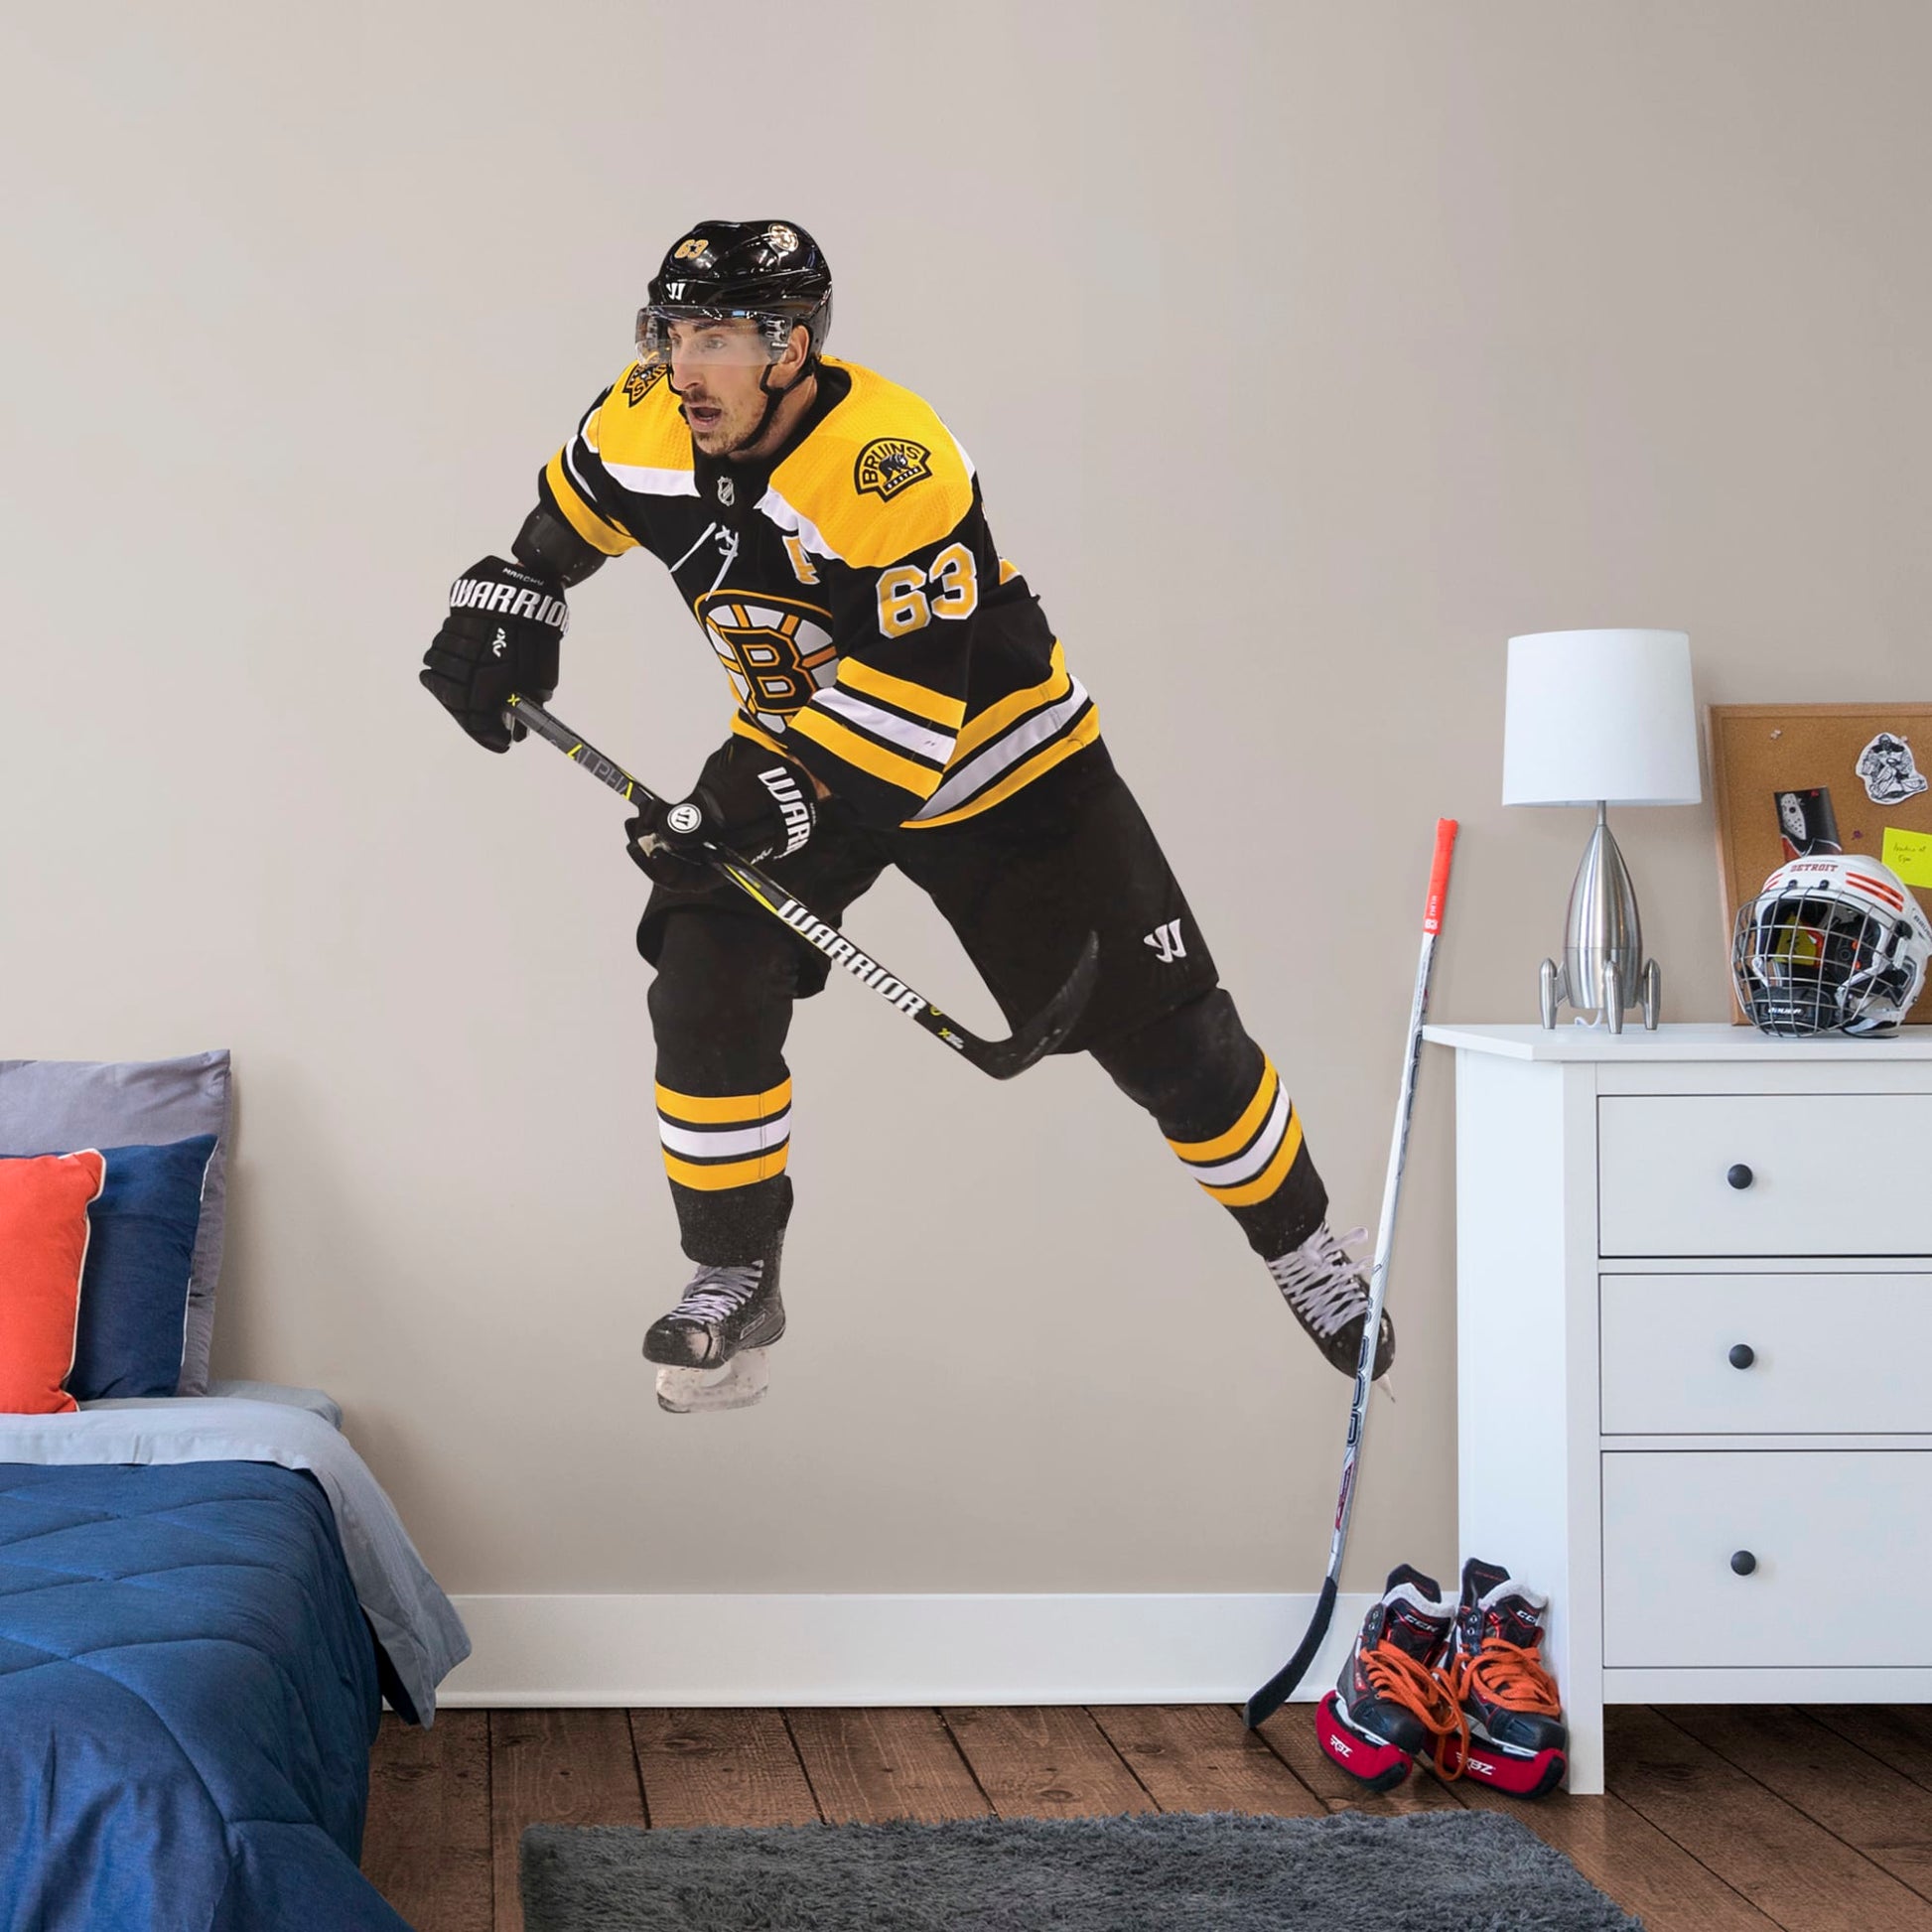 Giant Athlete + 2 Decals (38"W x 46"H) Bruins fans know that the opposing team should be scared when Brad Marchand hits the ice, and now you can bring that action to life in your own home with this Officially Licensed NHL Removable Wall Decal! Seen here in the Boston home uniform, this removable and reusable decal of Marchand is bold and durable, making it the perfect addition to your bedroom, office, or fan room. Go Bruins!